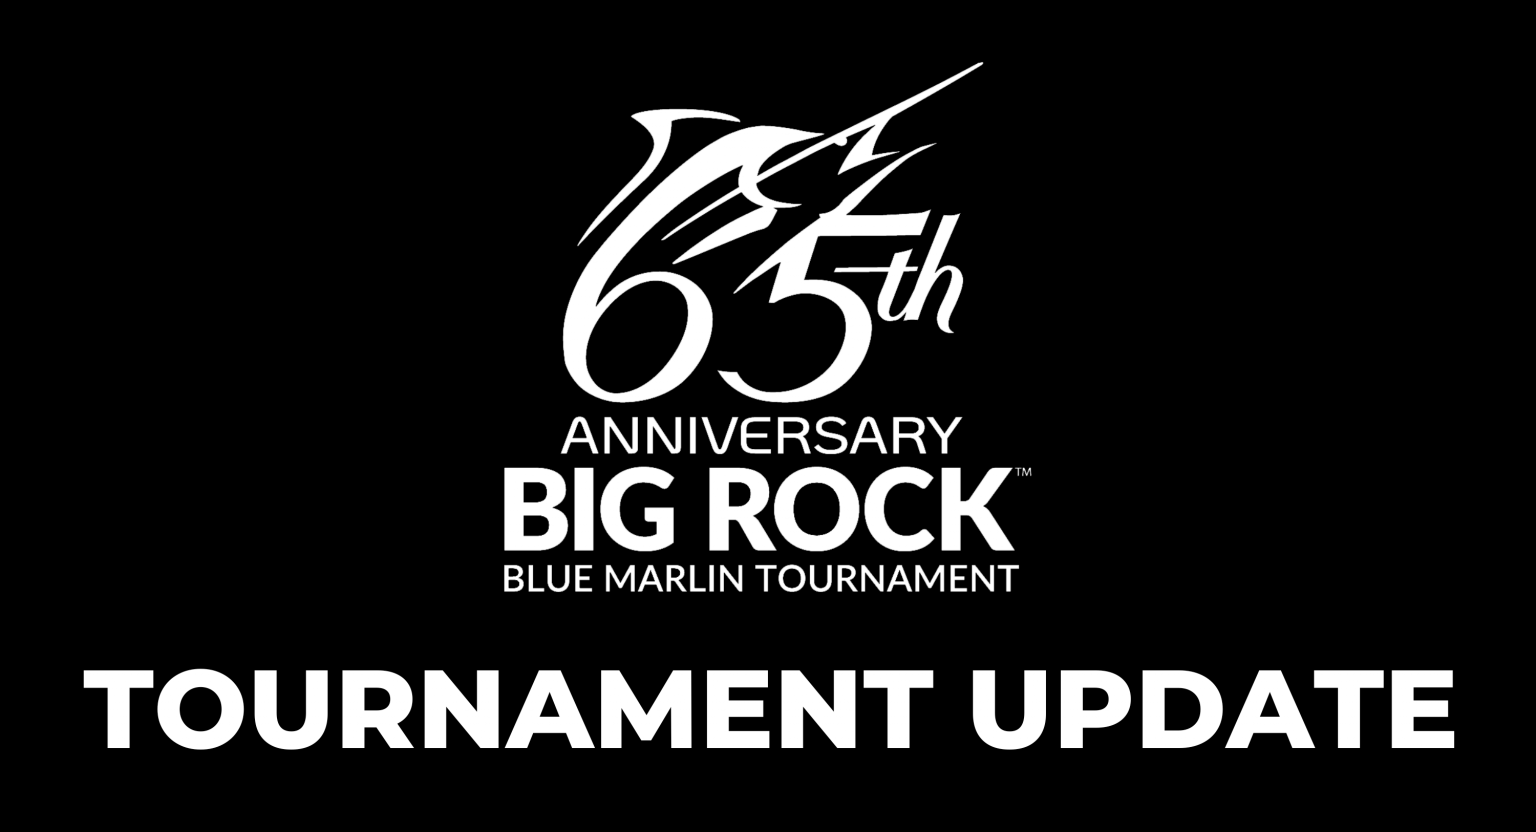 Official Statement From The Big Rock Blue Marlin Tournament The Big